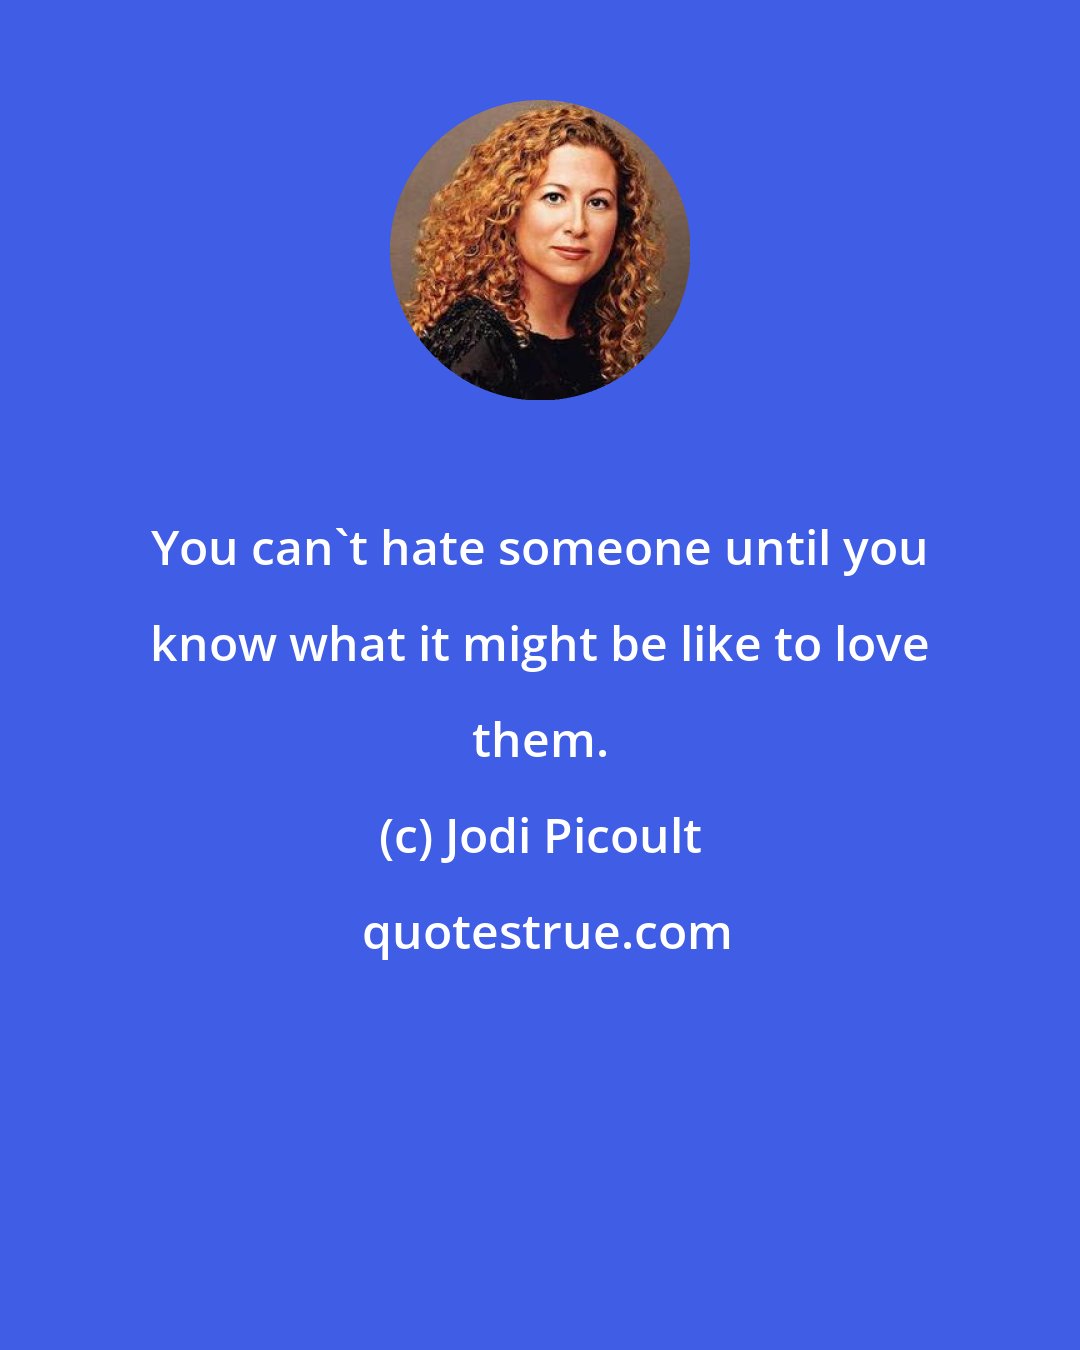 Jodi Picoult: You can't hate someone until you know what it might be like to love them.